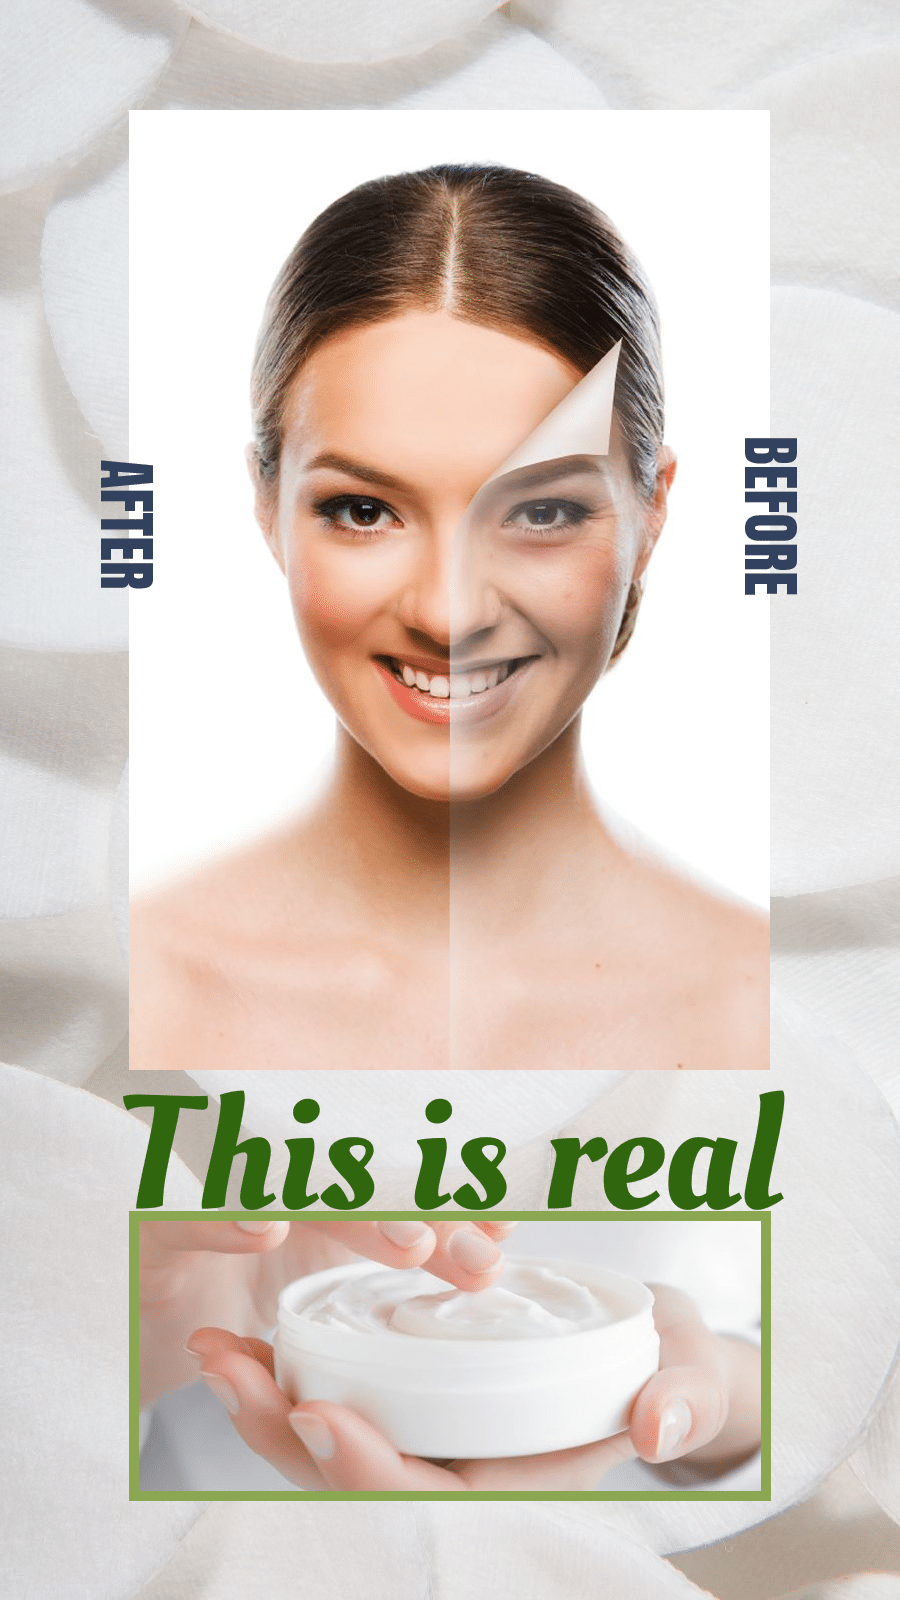 Facial Cream Beauty Skincare Product Before and After Comparison Ecommerce Story预览效果